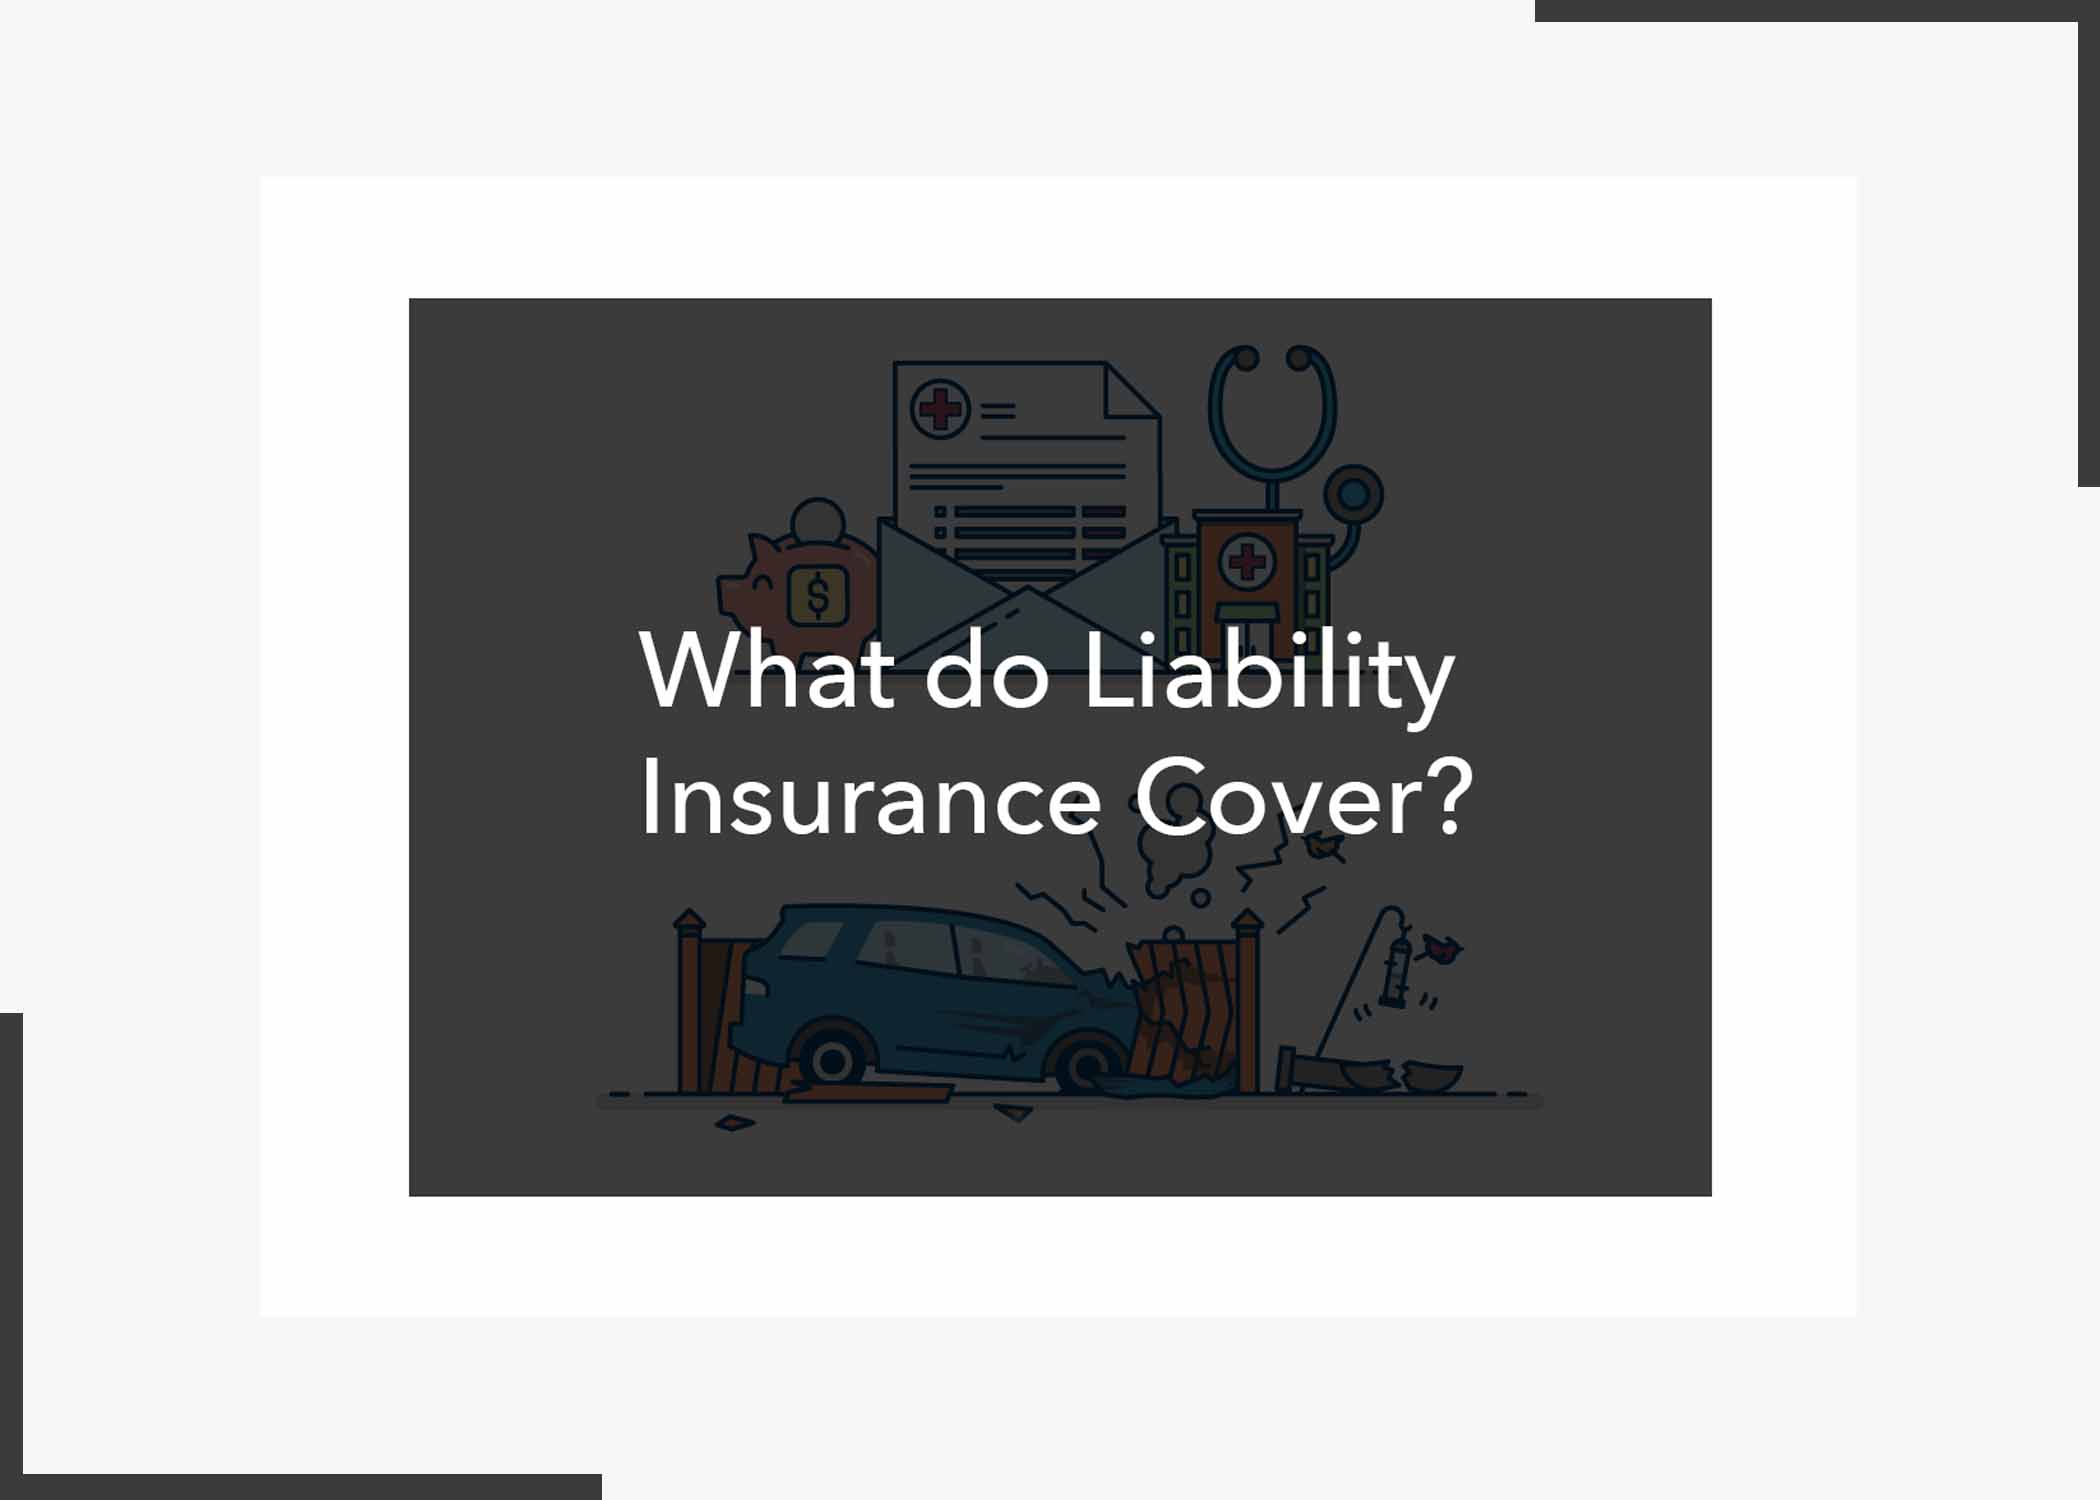 What do Liability Insurance Cover?